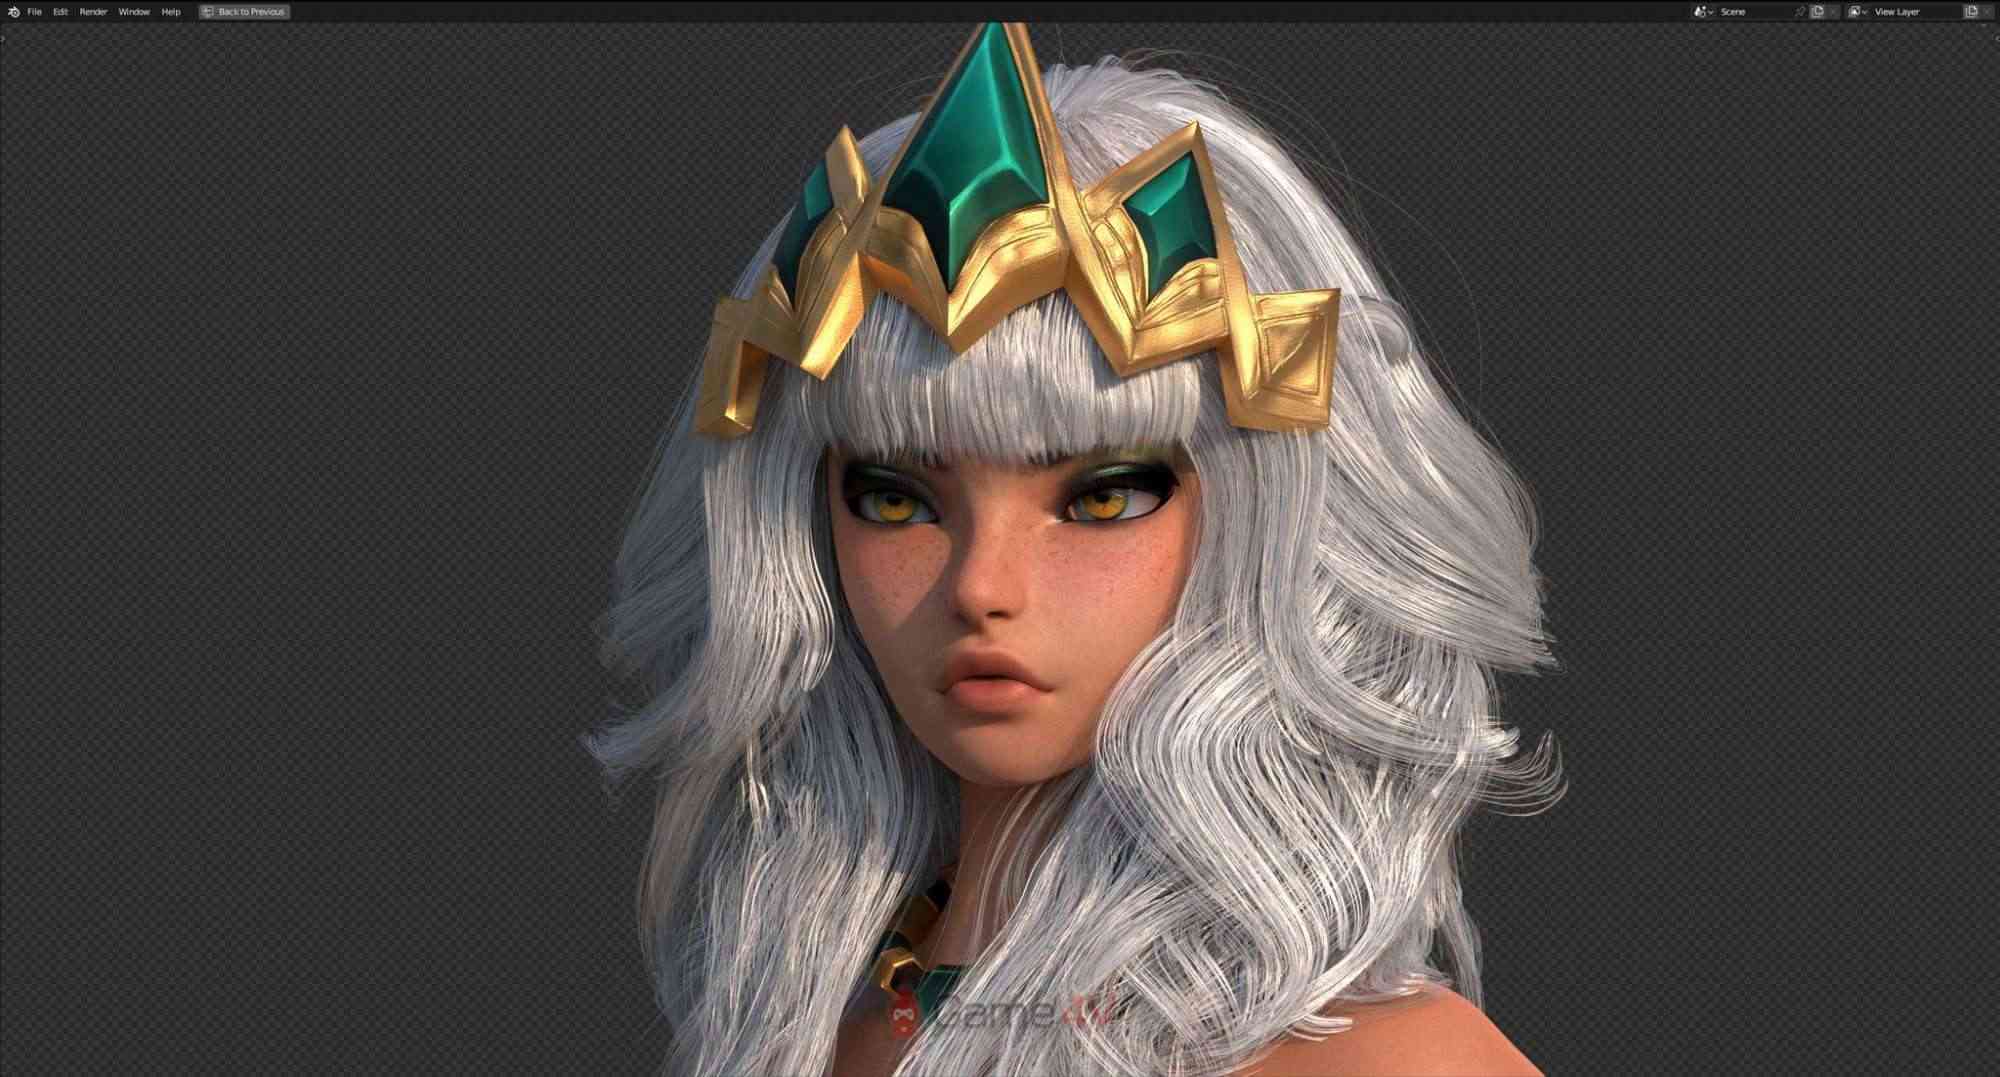 Qiyana's model is quite beautiful and similar to the default outfit image in League of Legends.